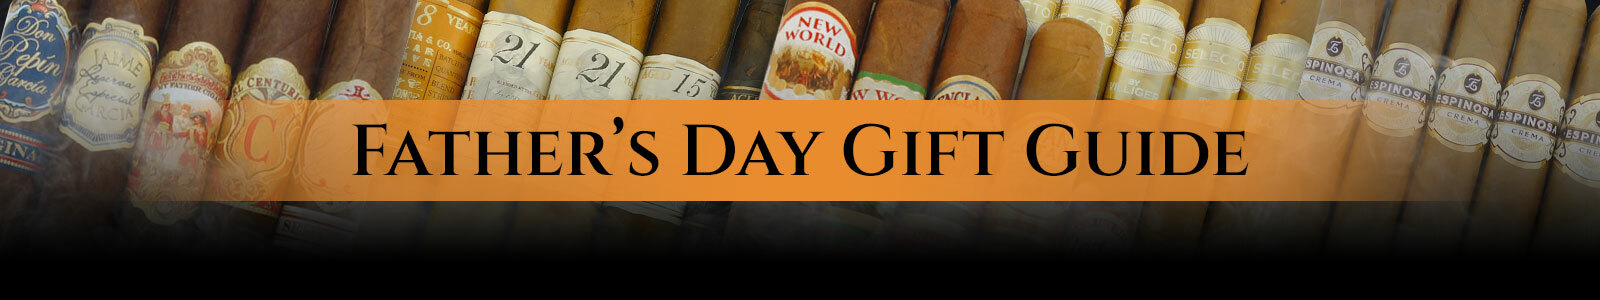 father-s-day-gift-guide-banner.jpg